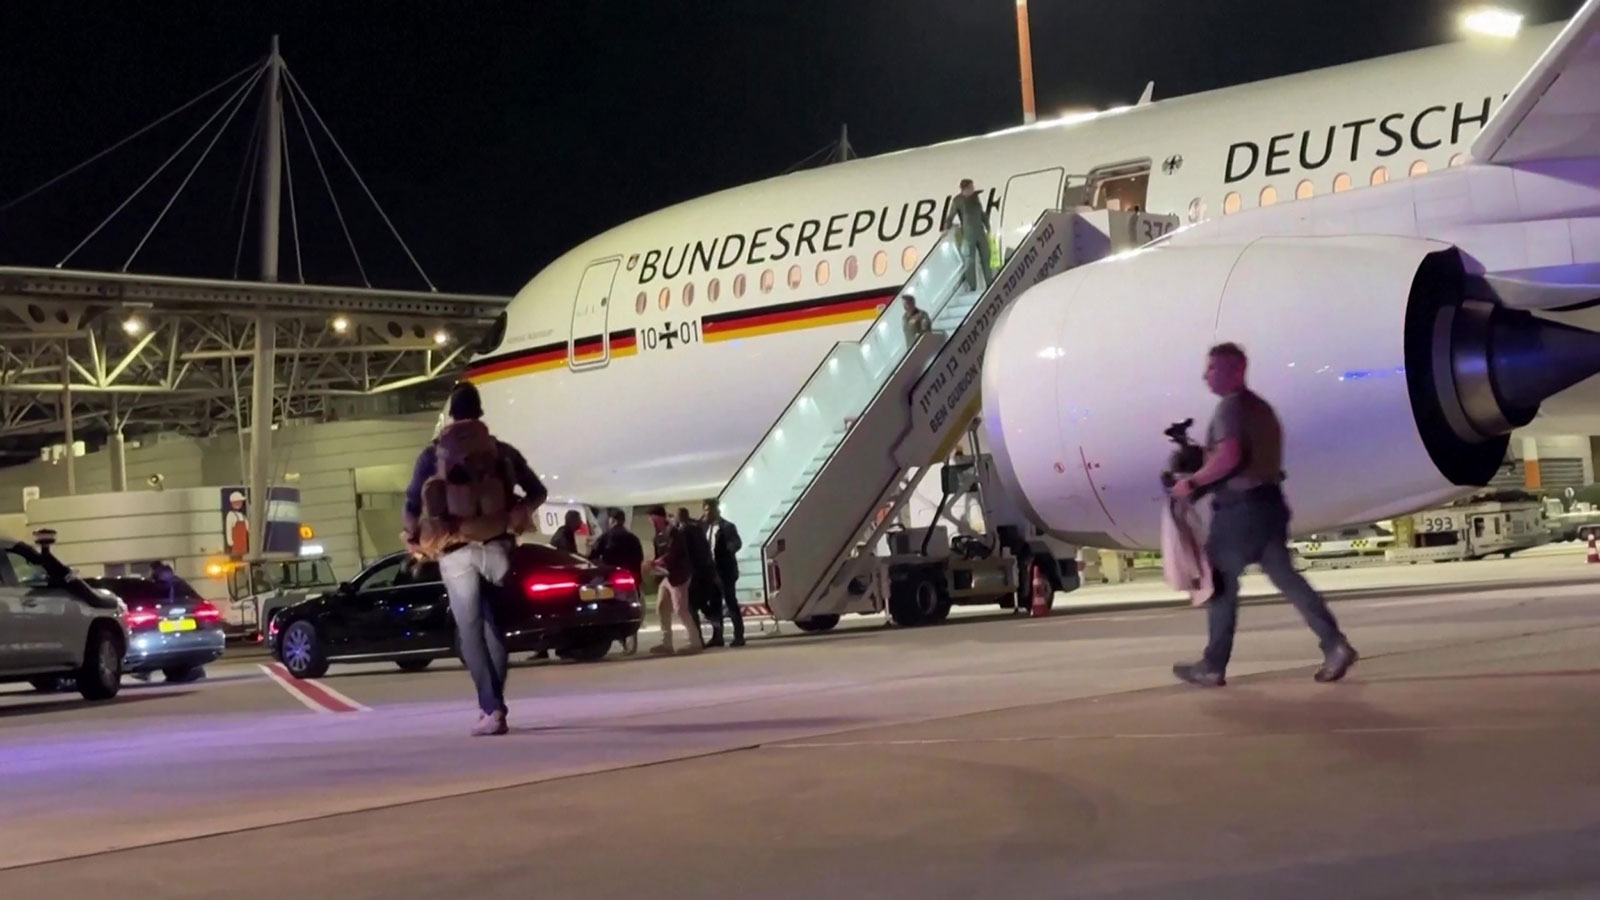 German Chancellor Olaf Scholz's plane was evacuated due to an air raid alert late Tuesday night, a Reuters correspondent traveling with the chancellor reported.  